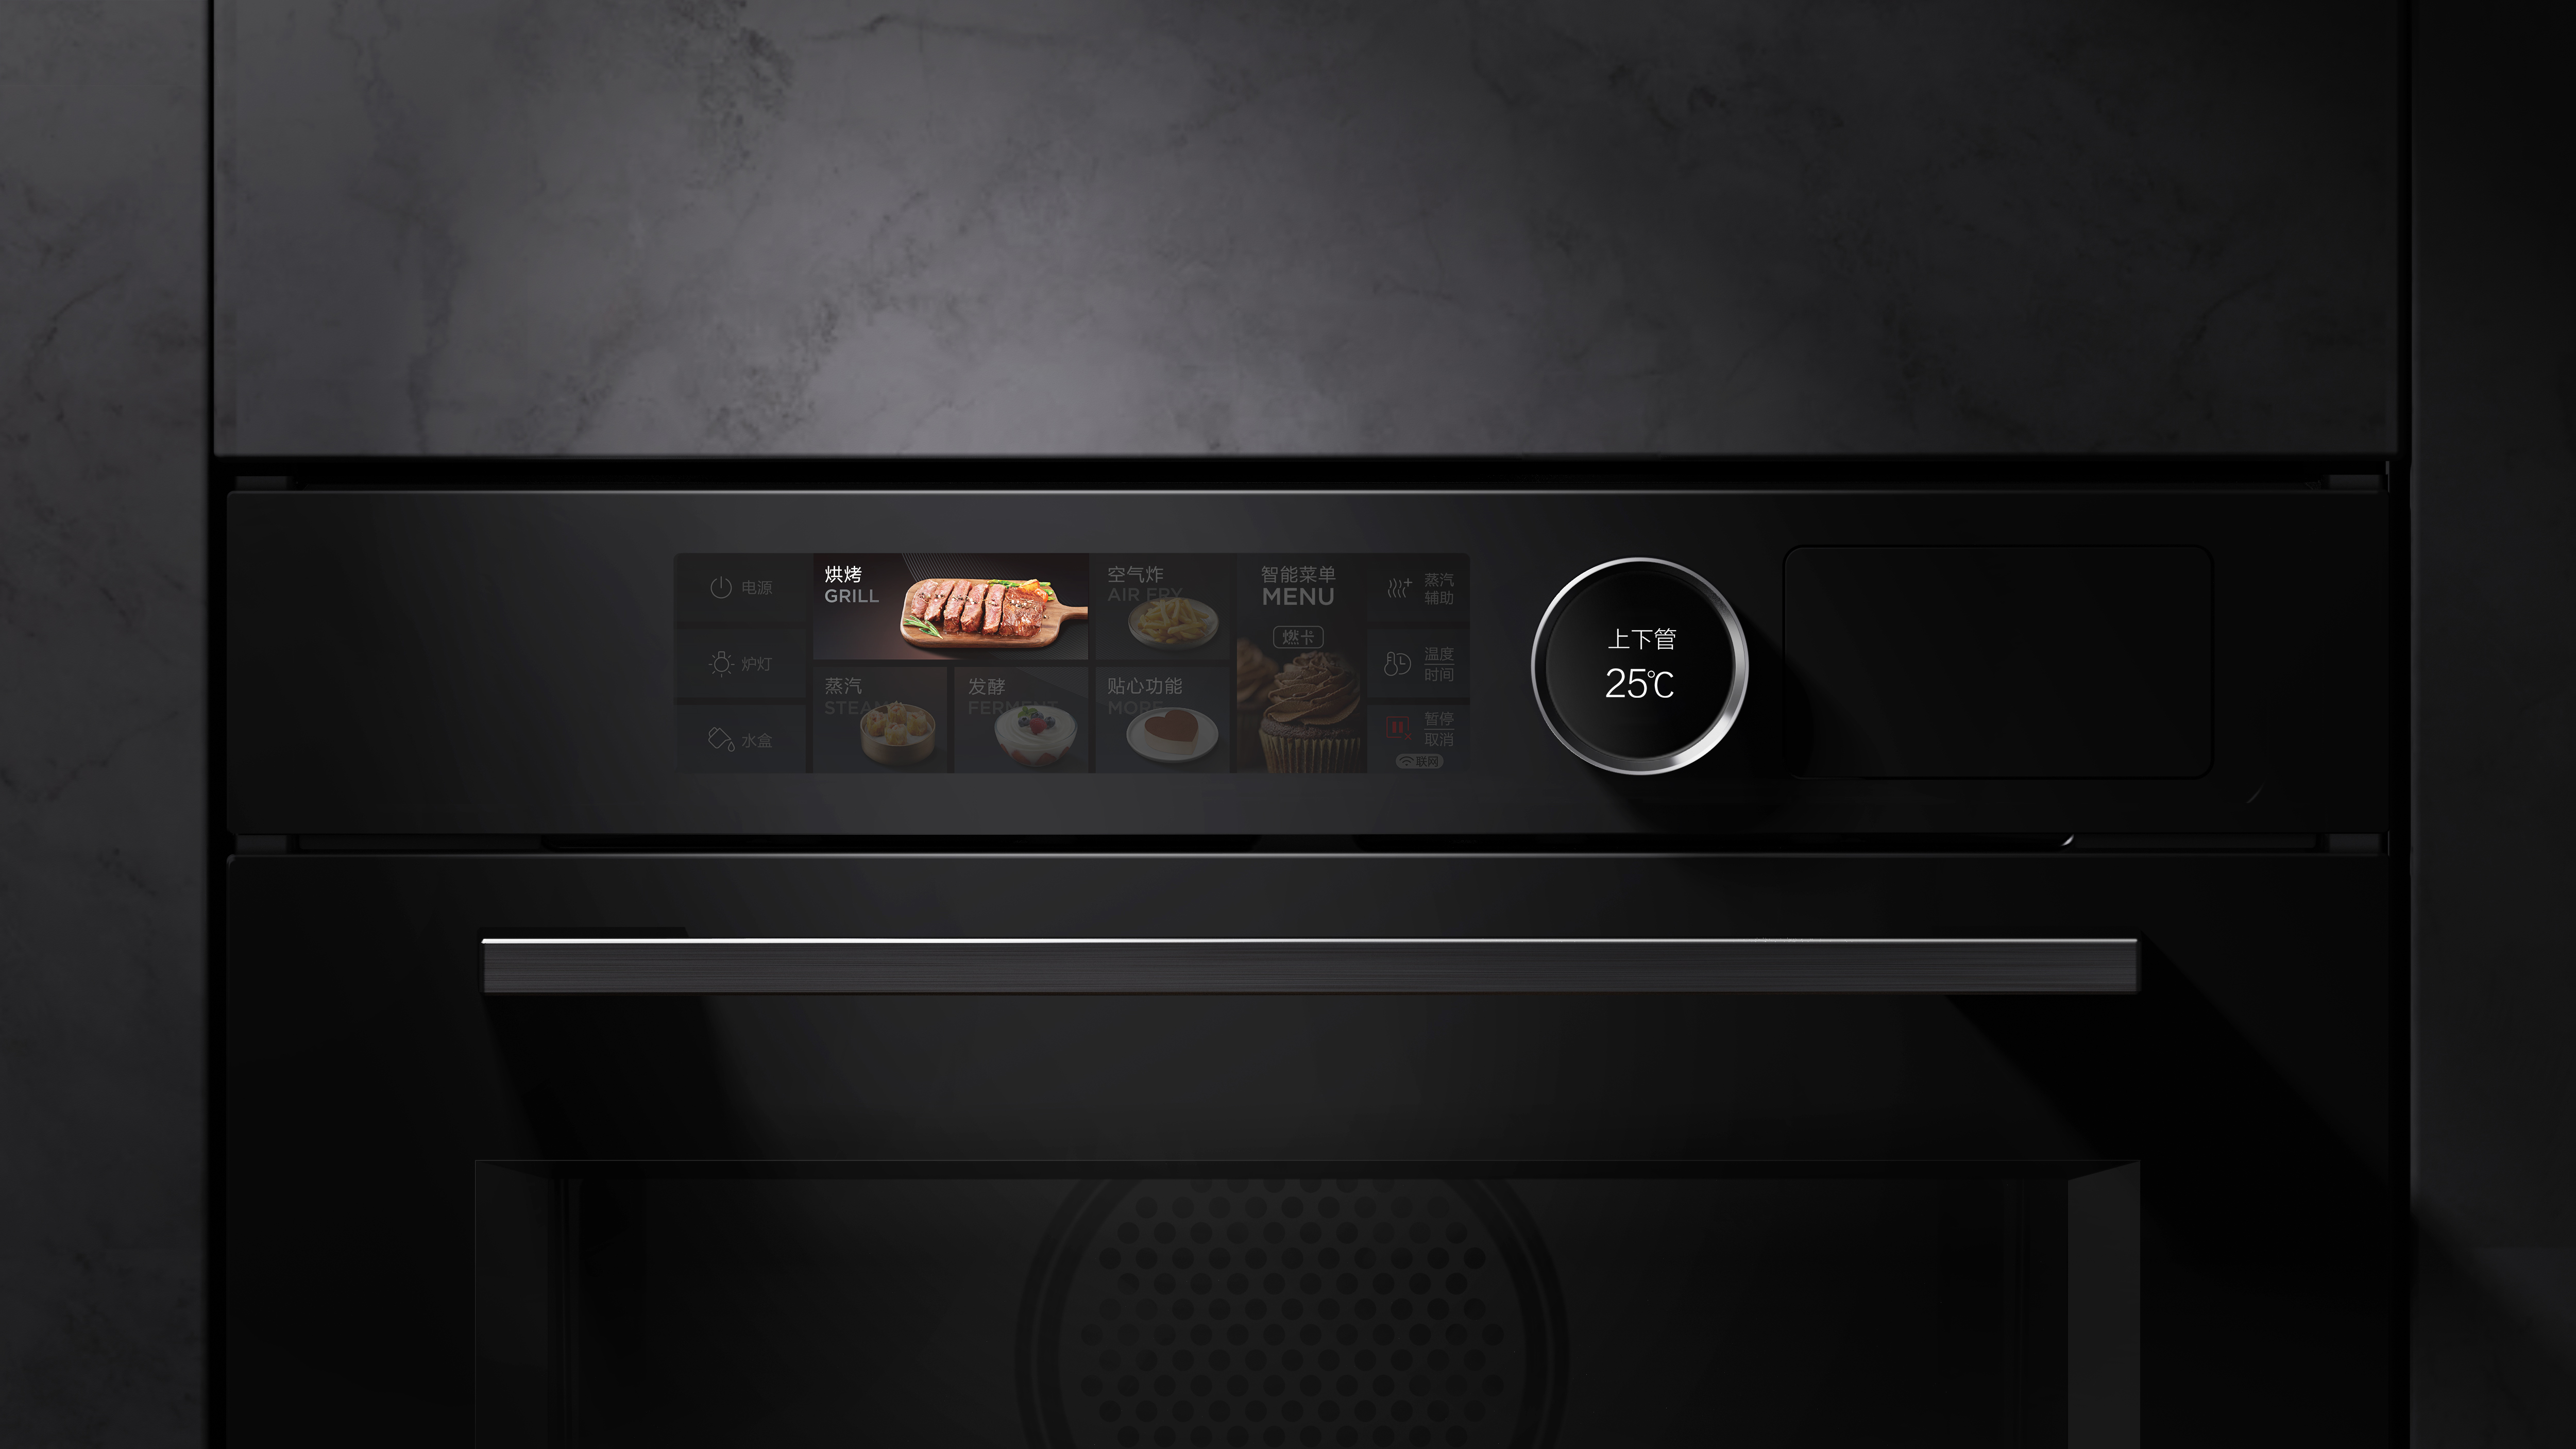 S6 built-in steam & oven